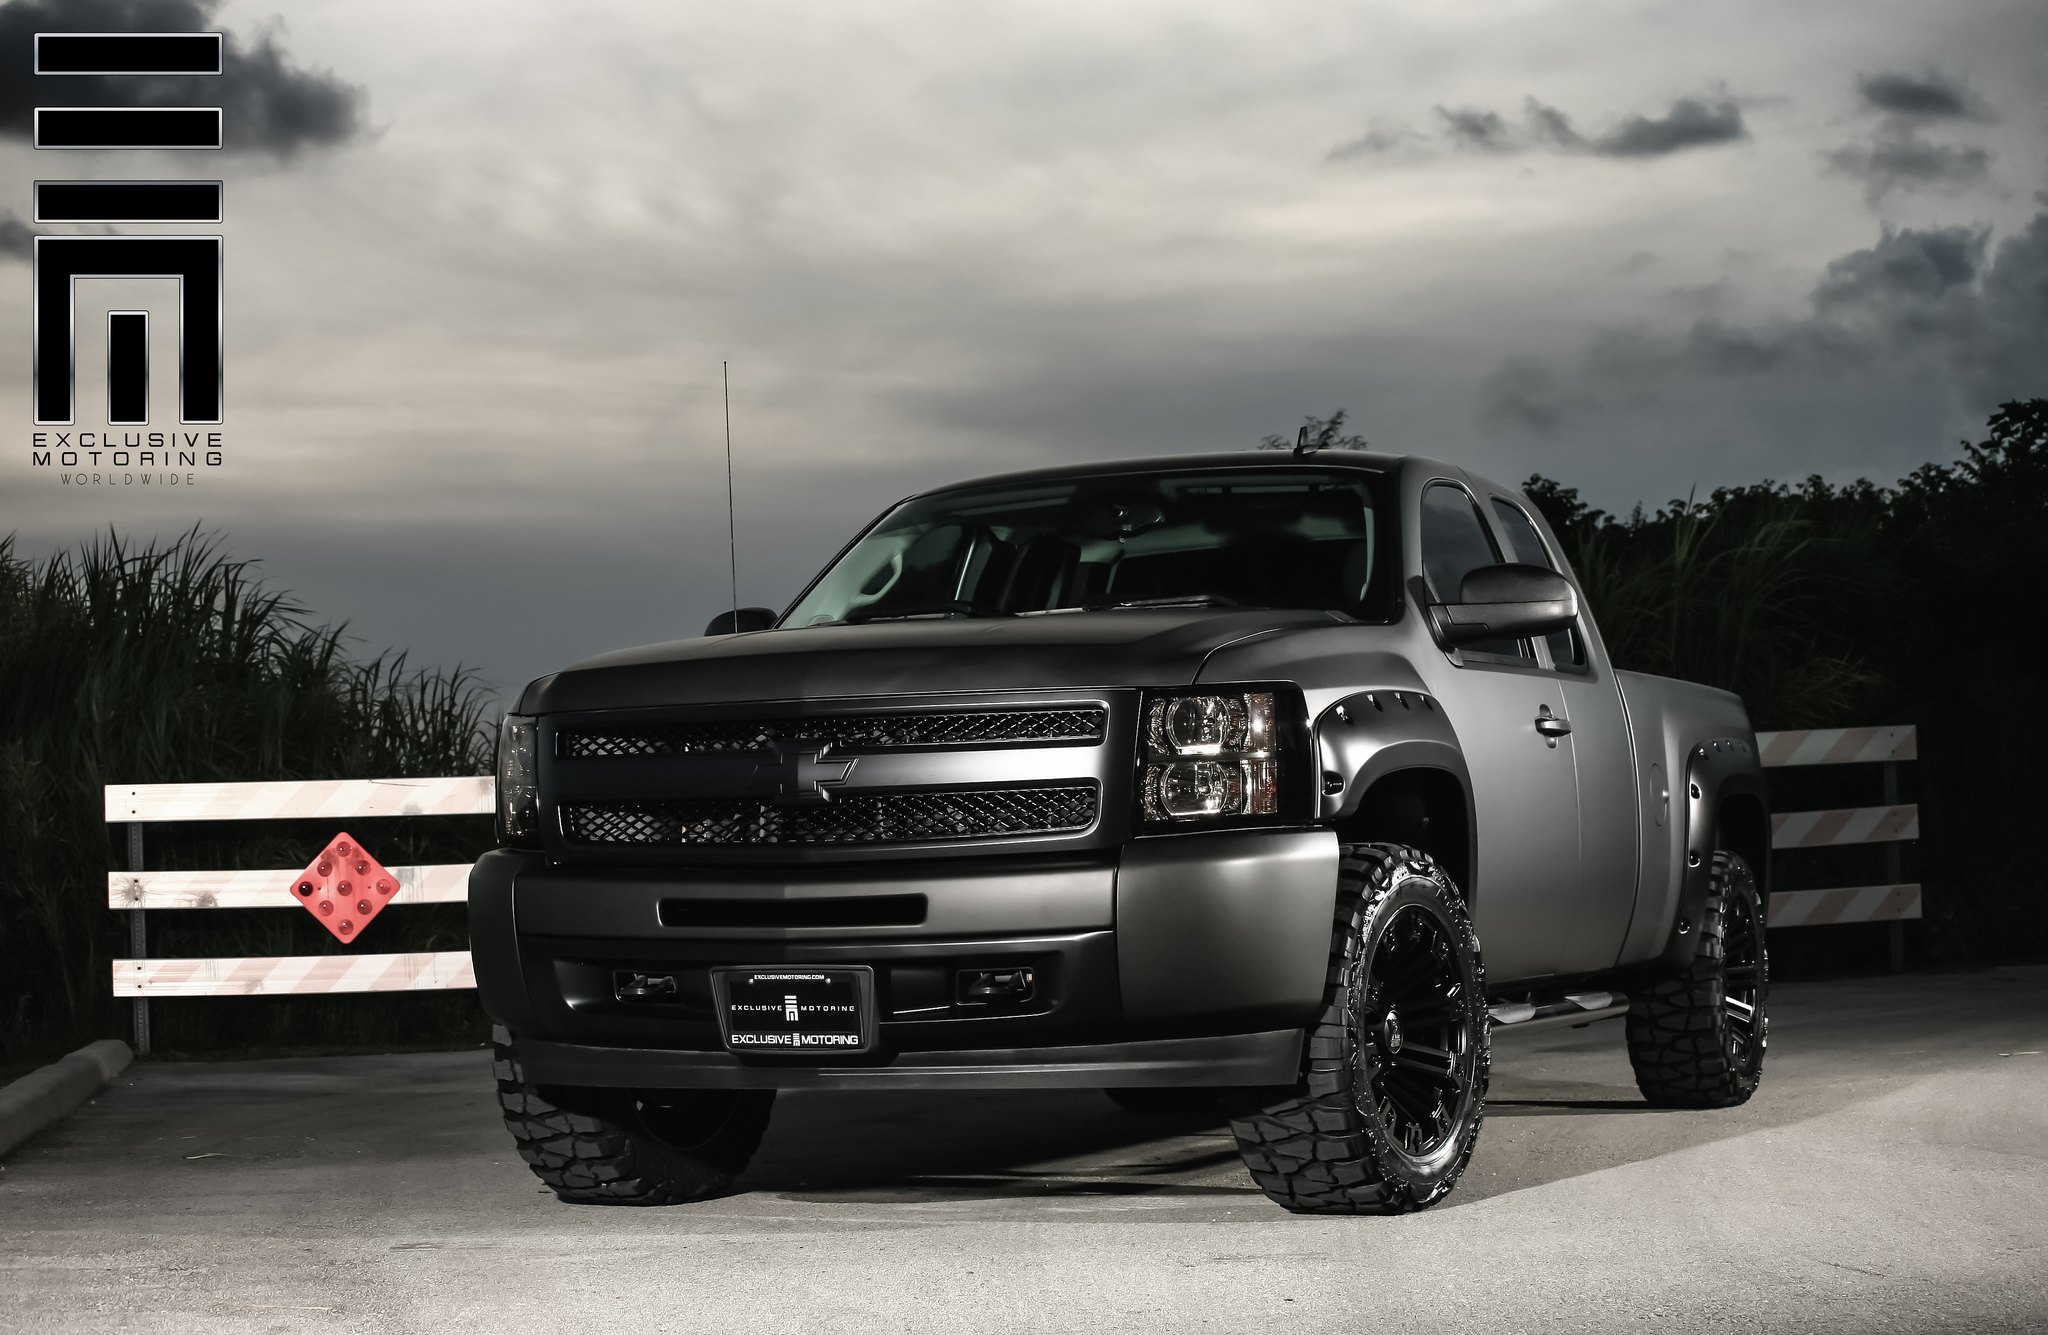 Matte-black Lifted Chevy Silverado With Bushwacker Fender Flares - Photo by Exclusive Motoring